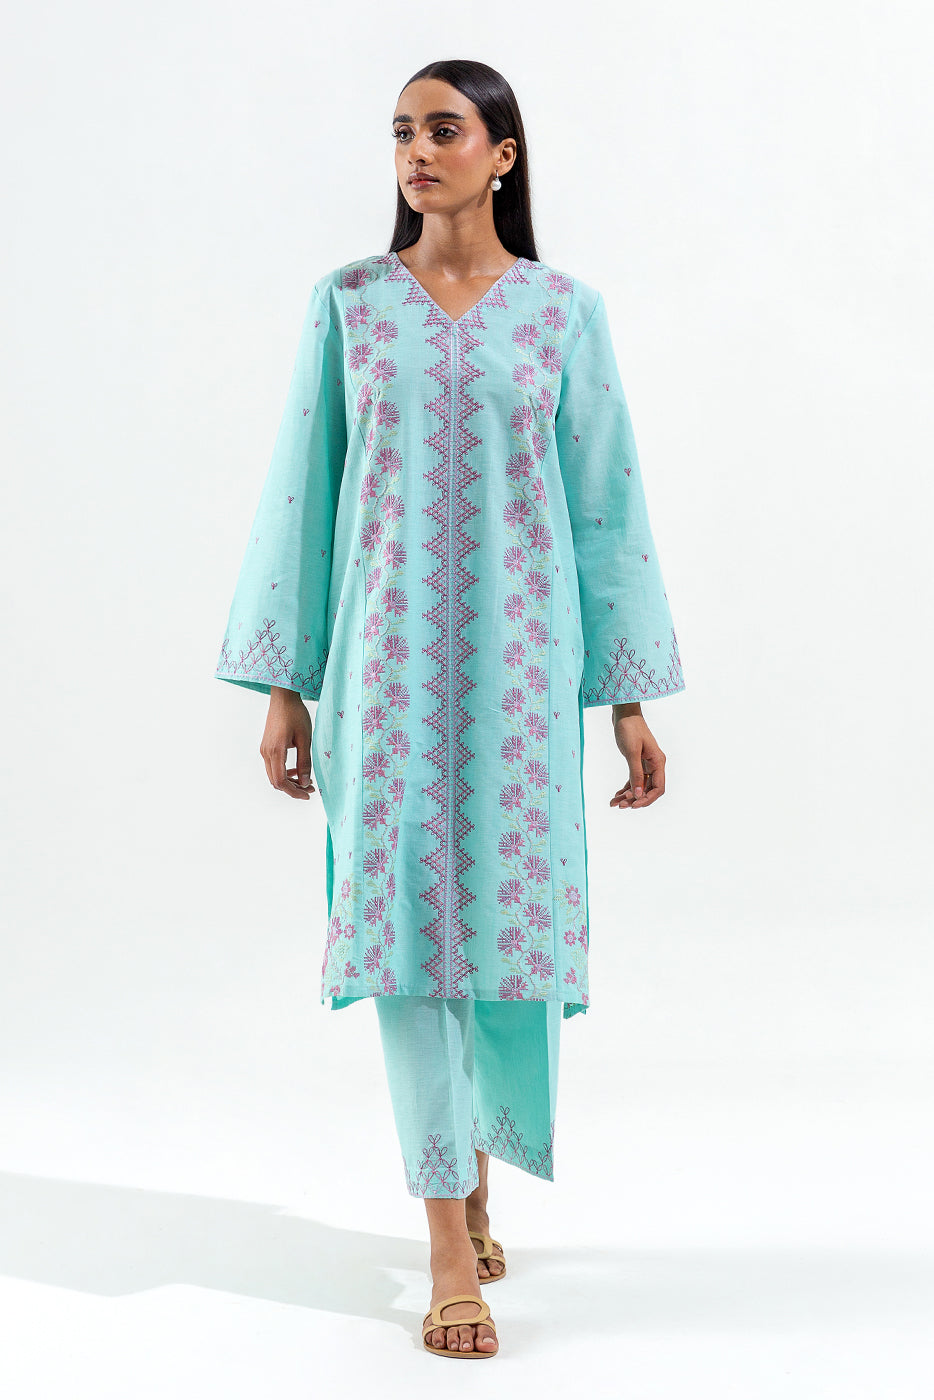 2 PIECE EMBROIDERED CHAMBREY SUIT (PRET)